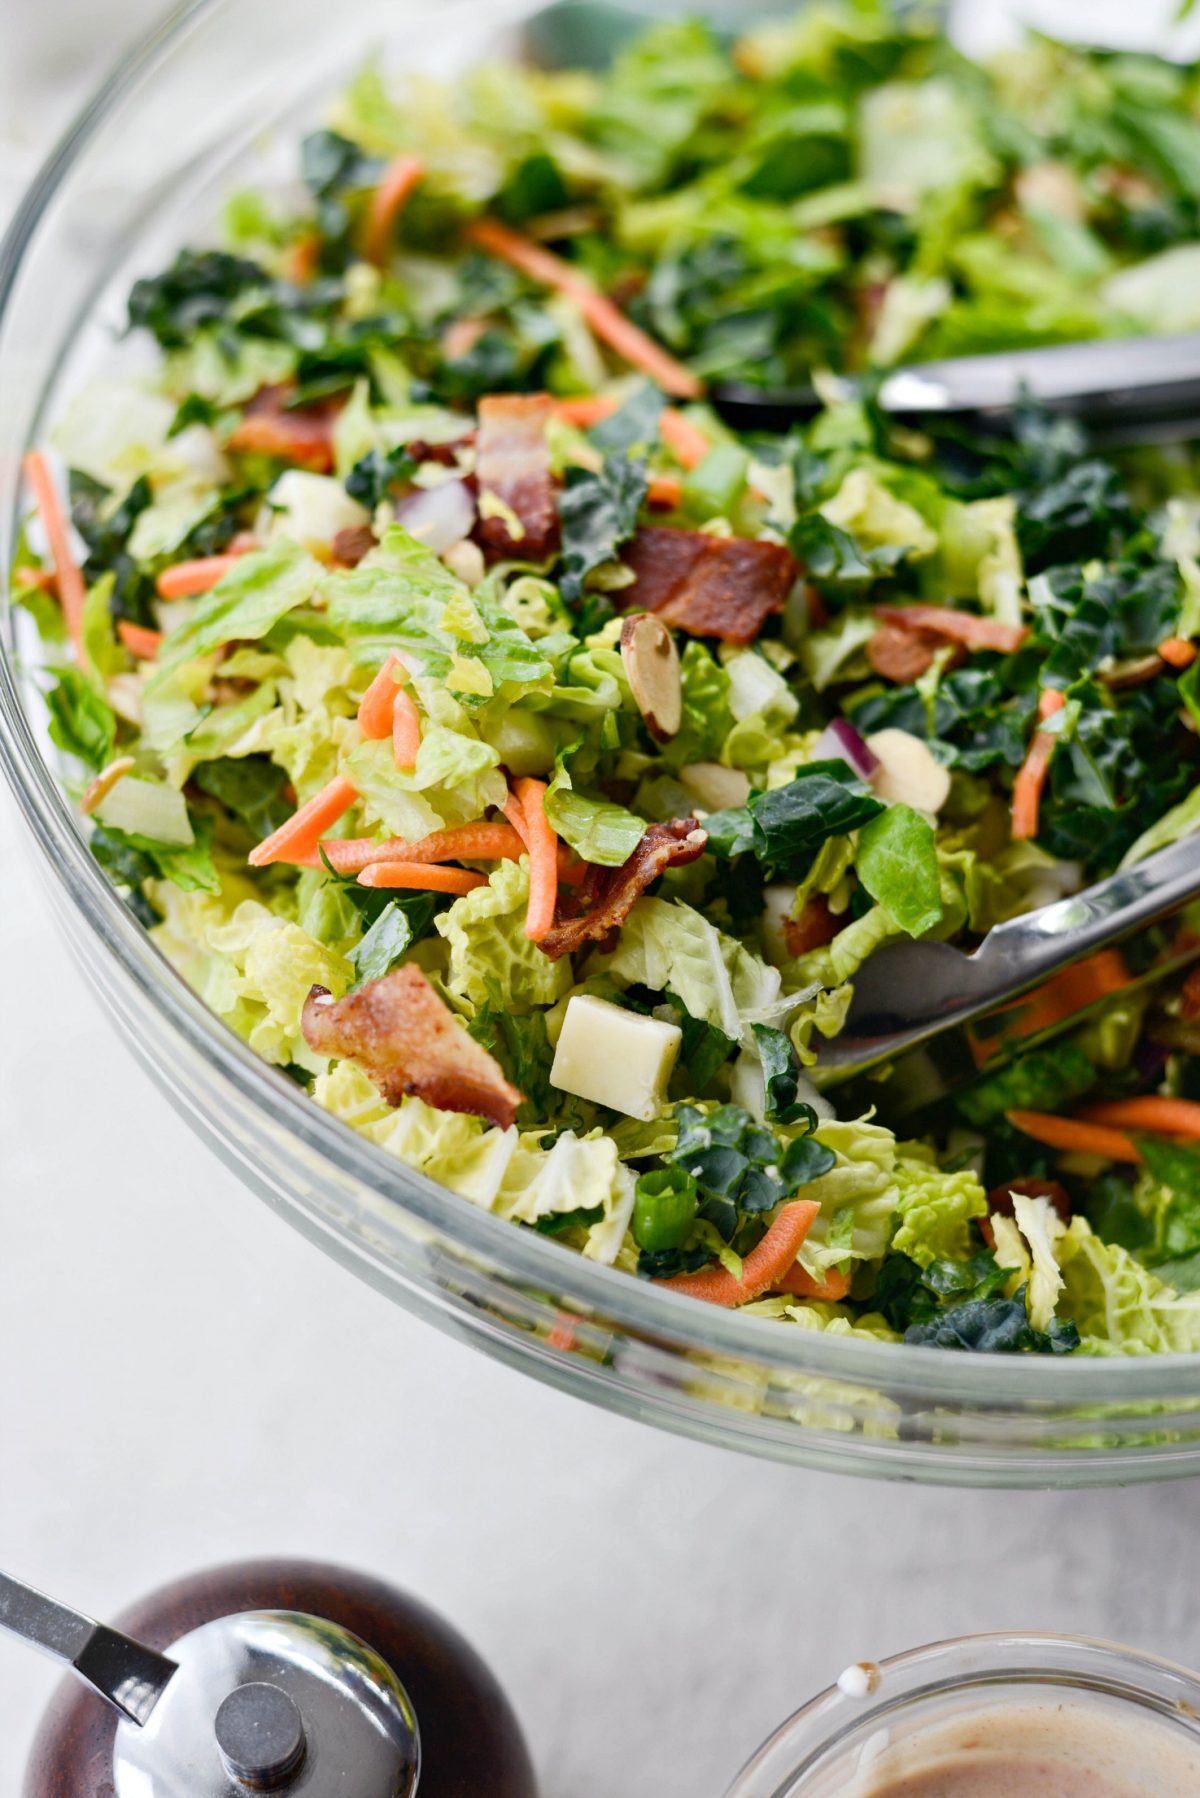 toss salad ingredients together in bowl.